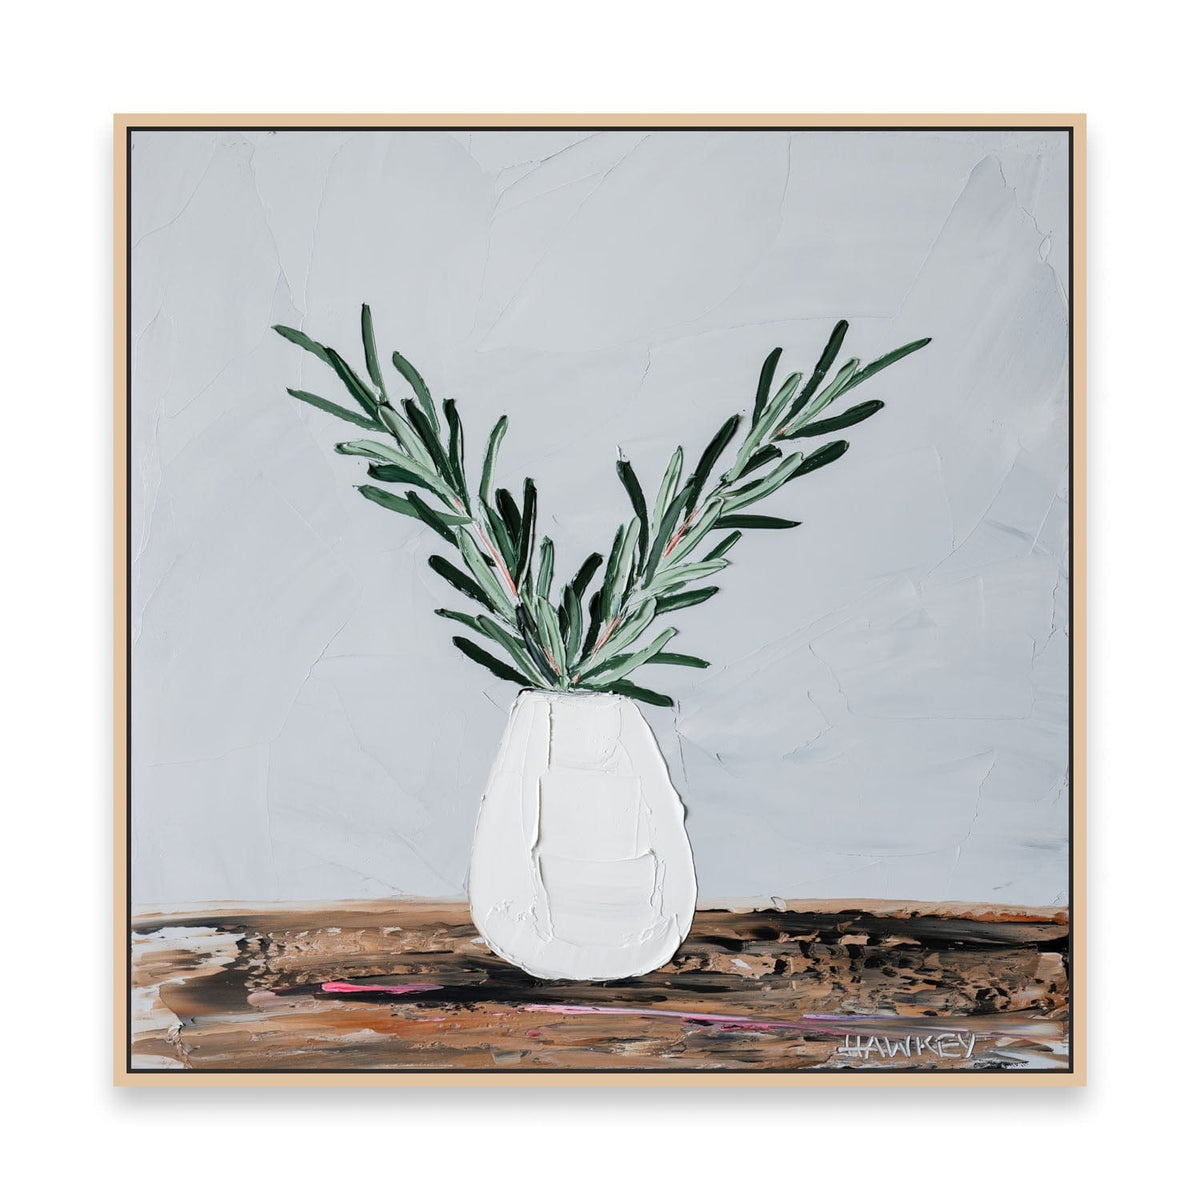 Extending An Olive Branch 2 - Limited Edition Print